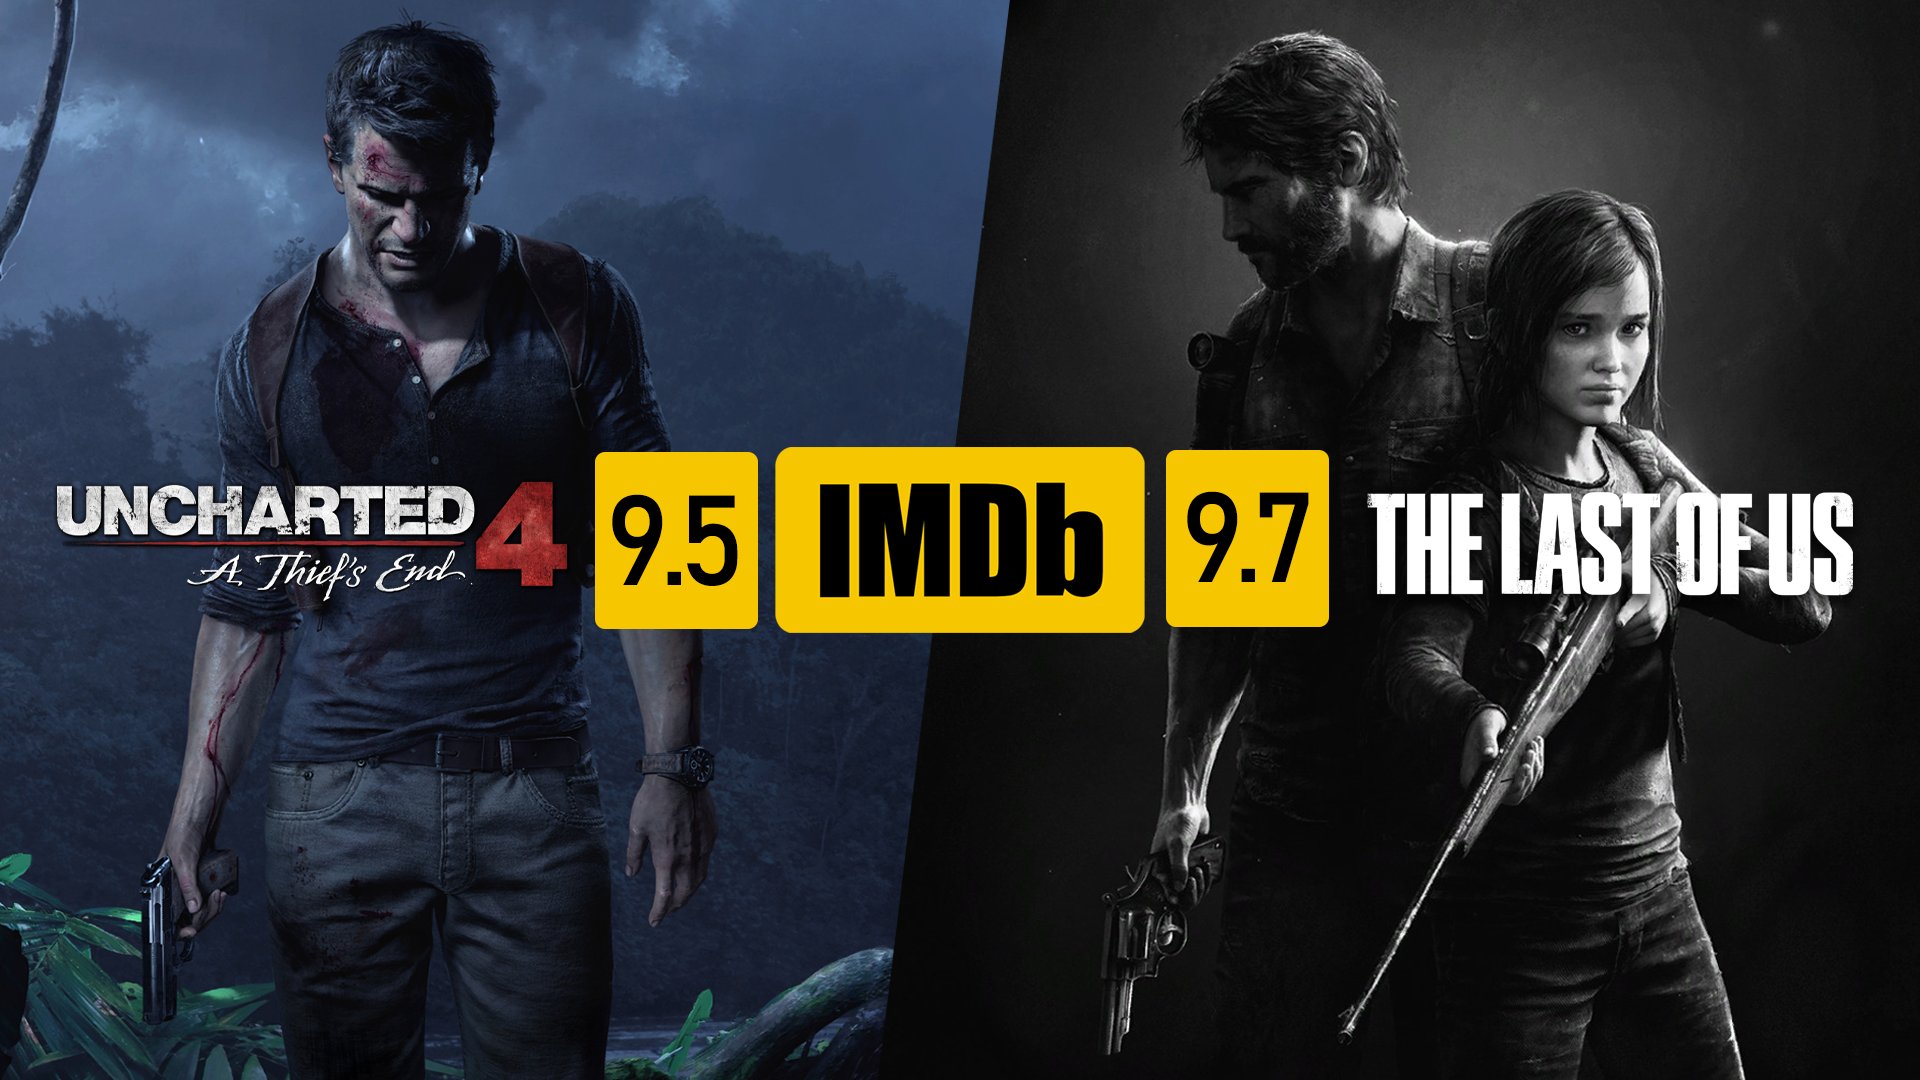 Naughty Dog Info 🐾 on X: Uncharted 4 has an IMDb score of 9.5 The Last of  Us has an IMDb score of 9.7 This makes them one of the highest rated